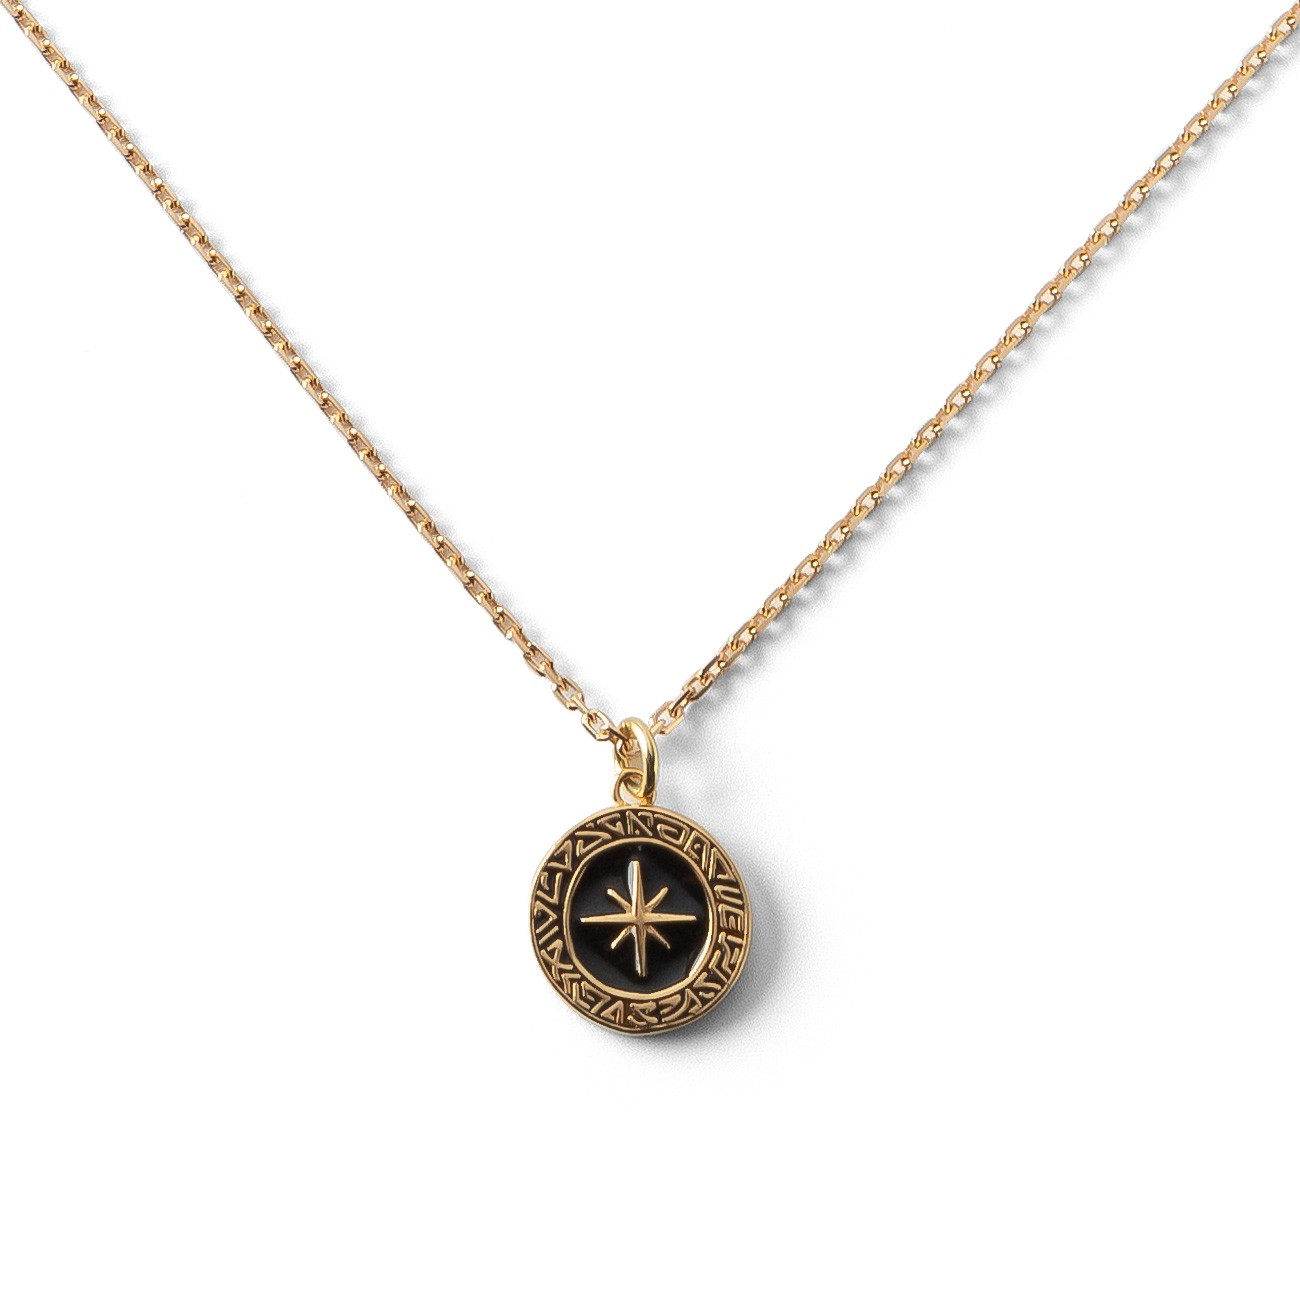 Delicate compass necklace, sterling silver 925